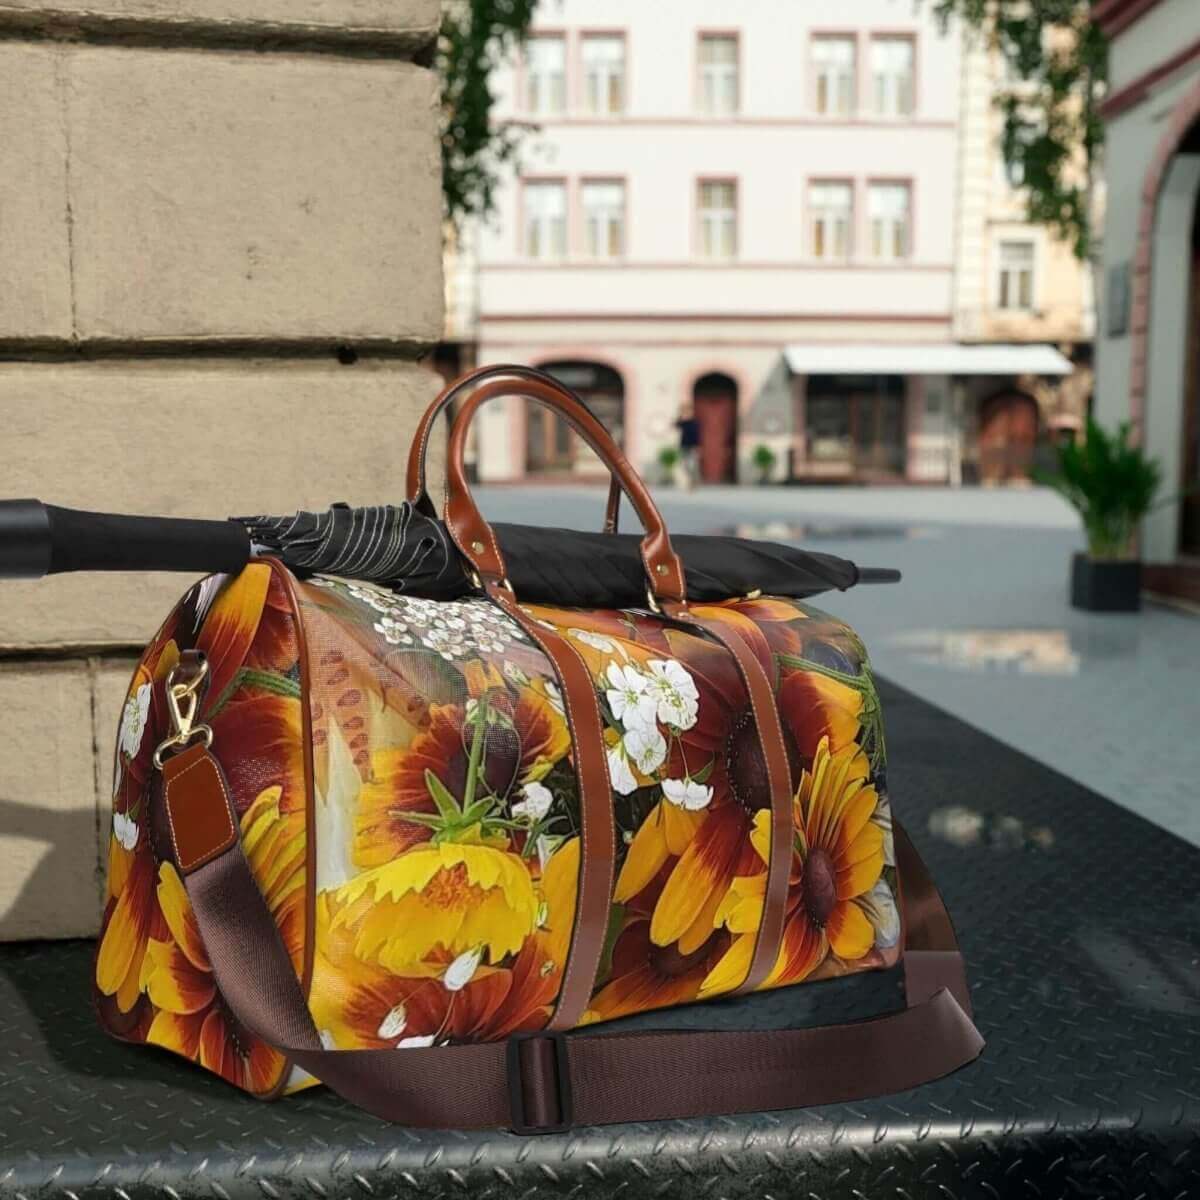 Our Bouquet Design Waterproof Travel Bag - Hearth Home & Living